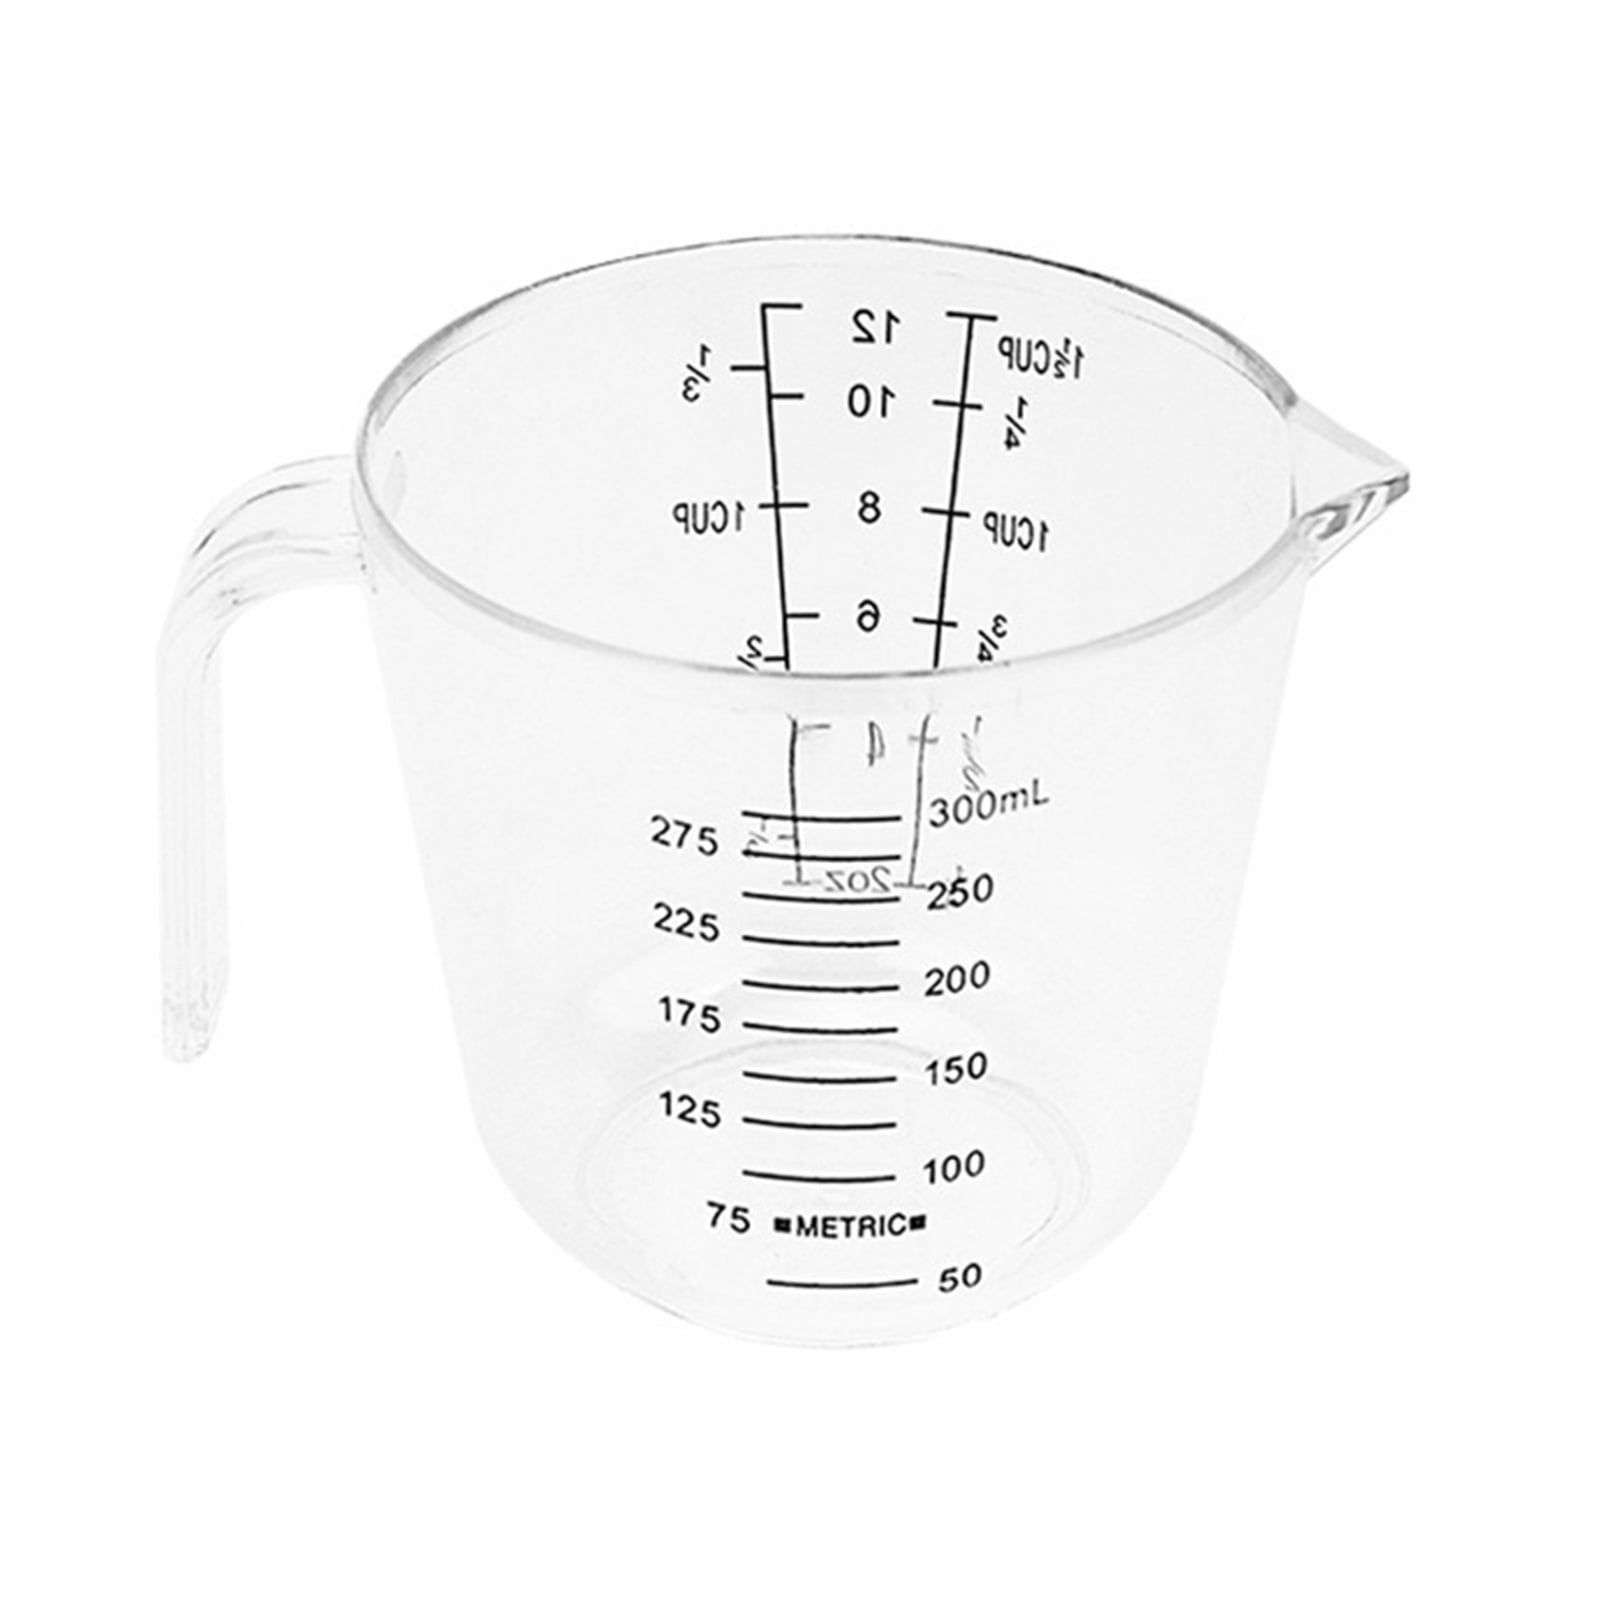 How to Measure Liquids Without a Measuring Cup: 3 Methods